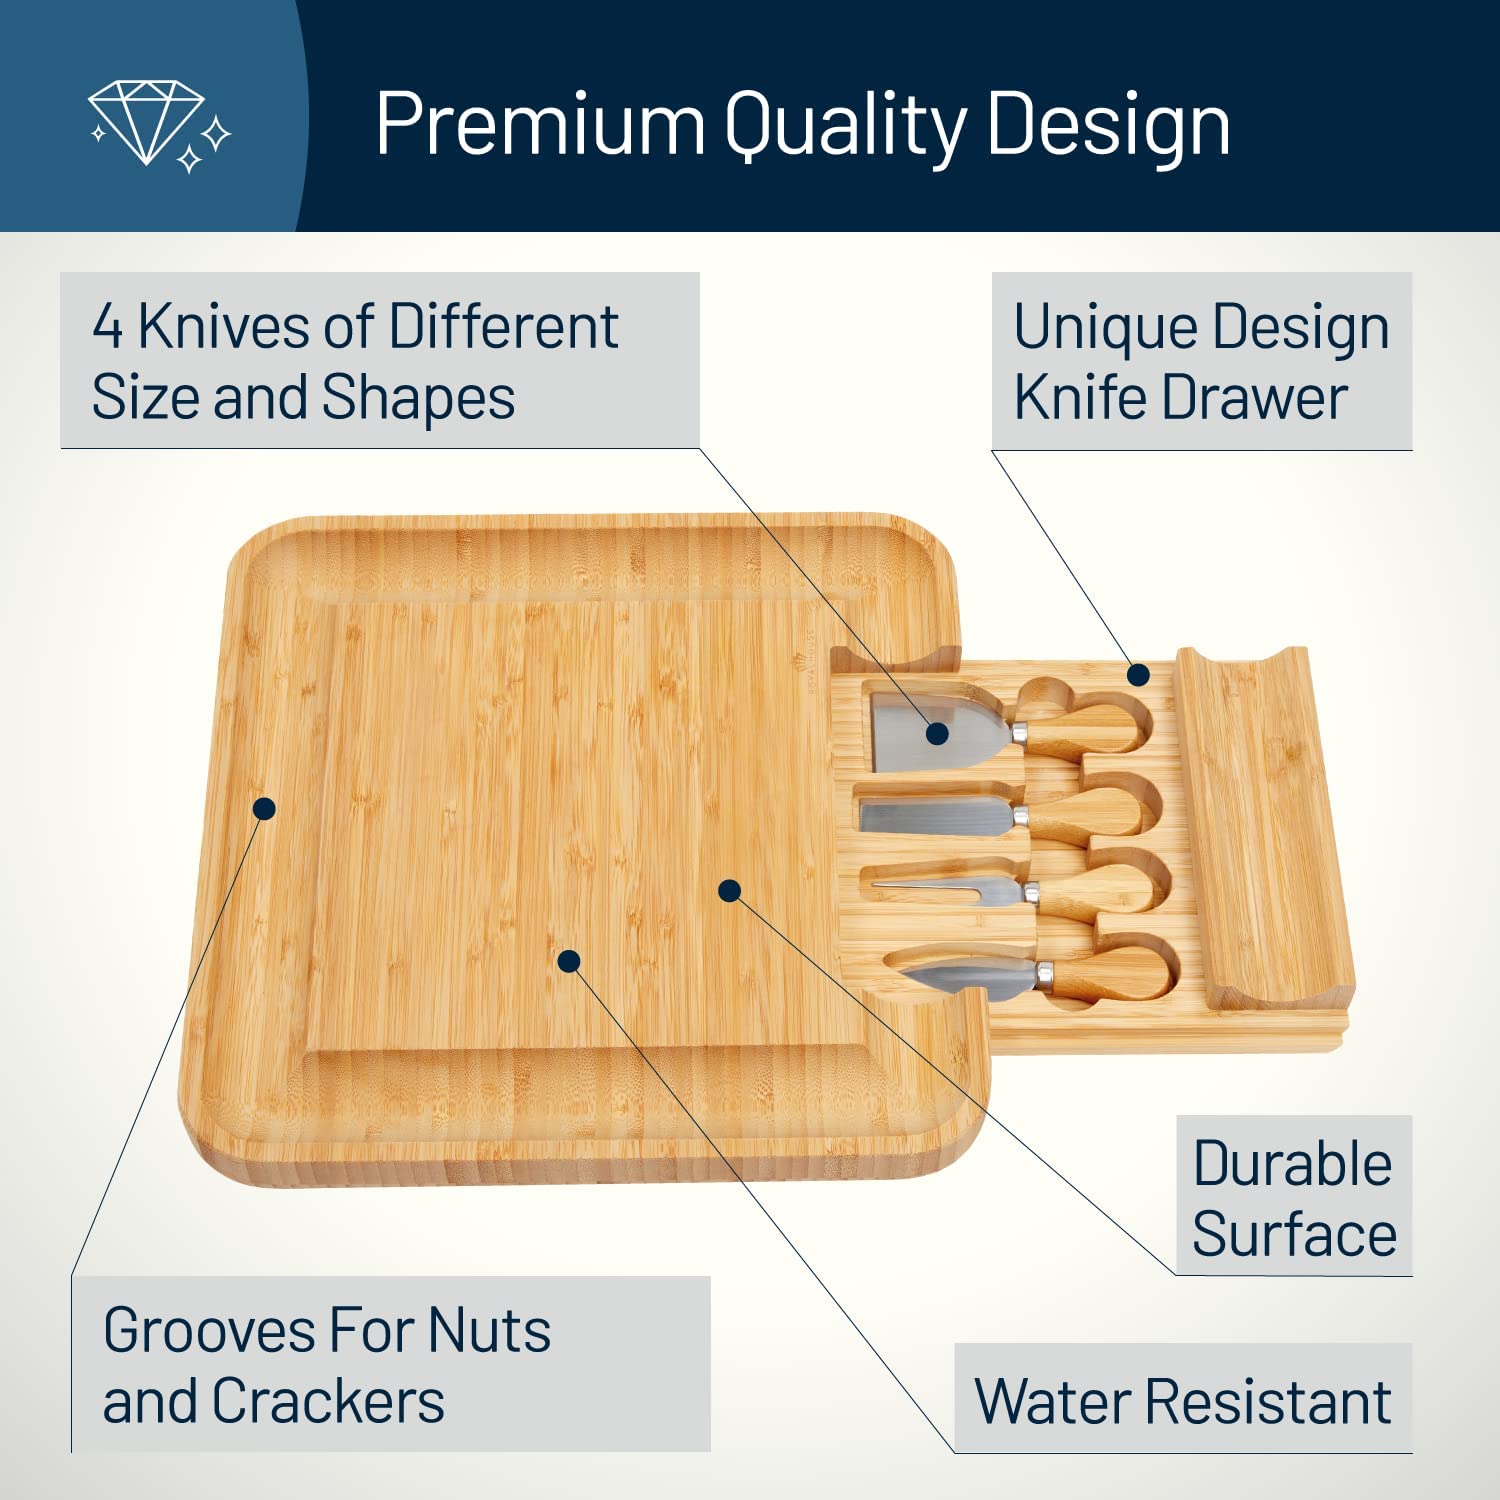 Product features for a charcuterie board with slide out drawer.